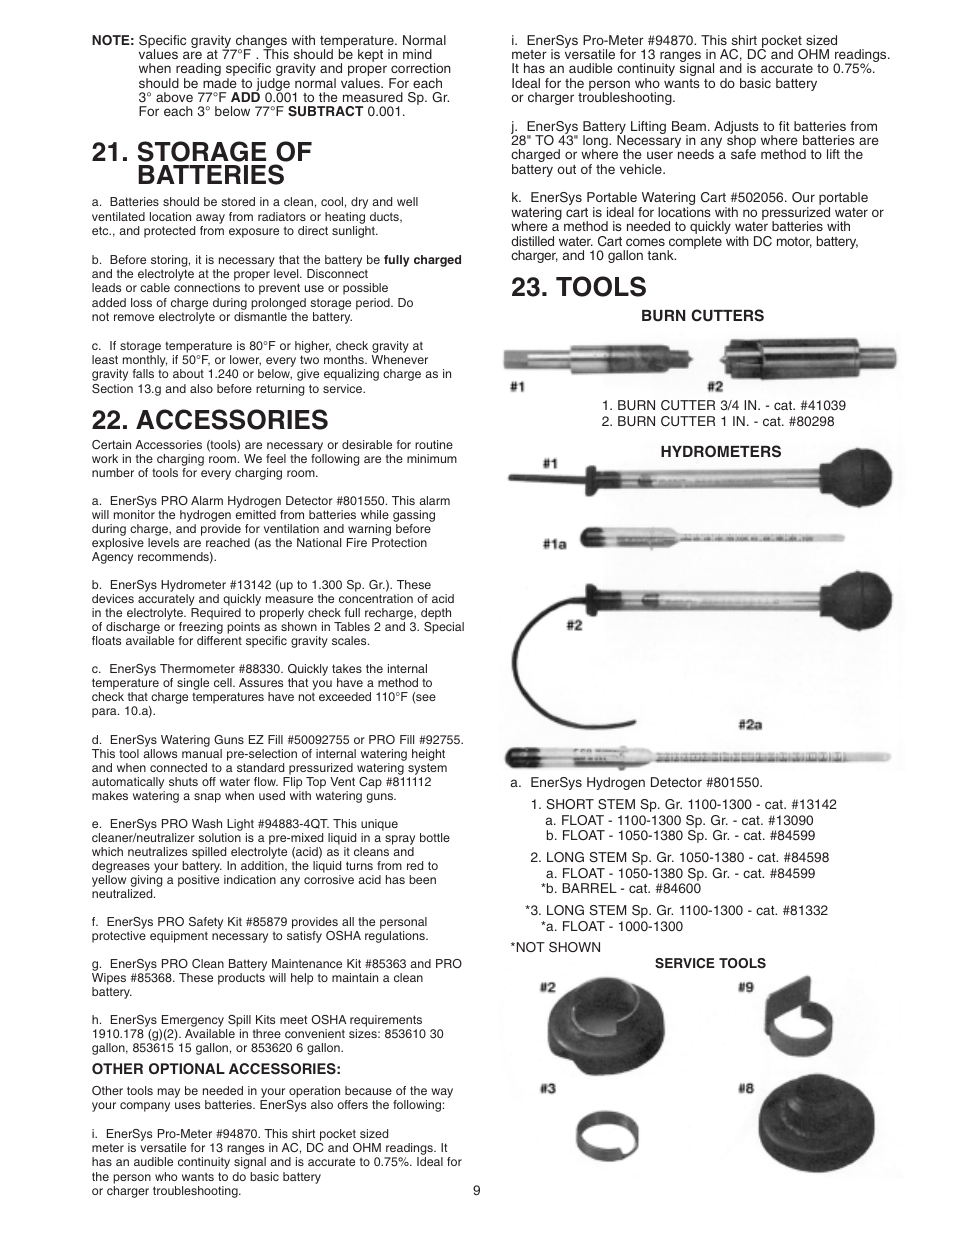 Tools, Storage of batteries, Accessories | Ironclad Automobile Parts User Manual | Page 9 / 11